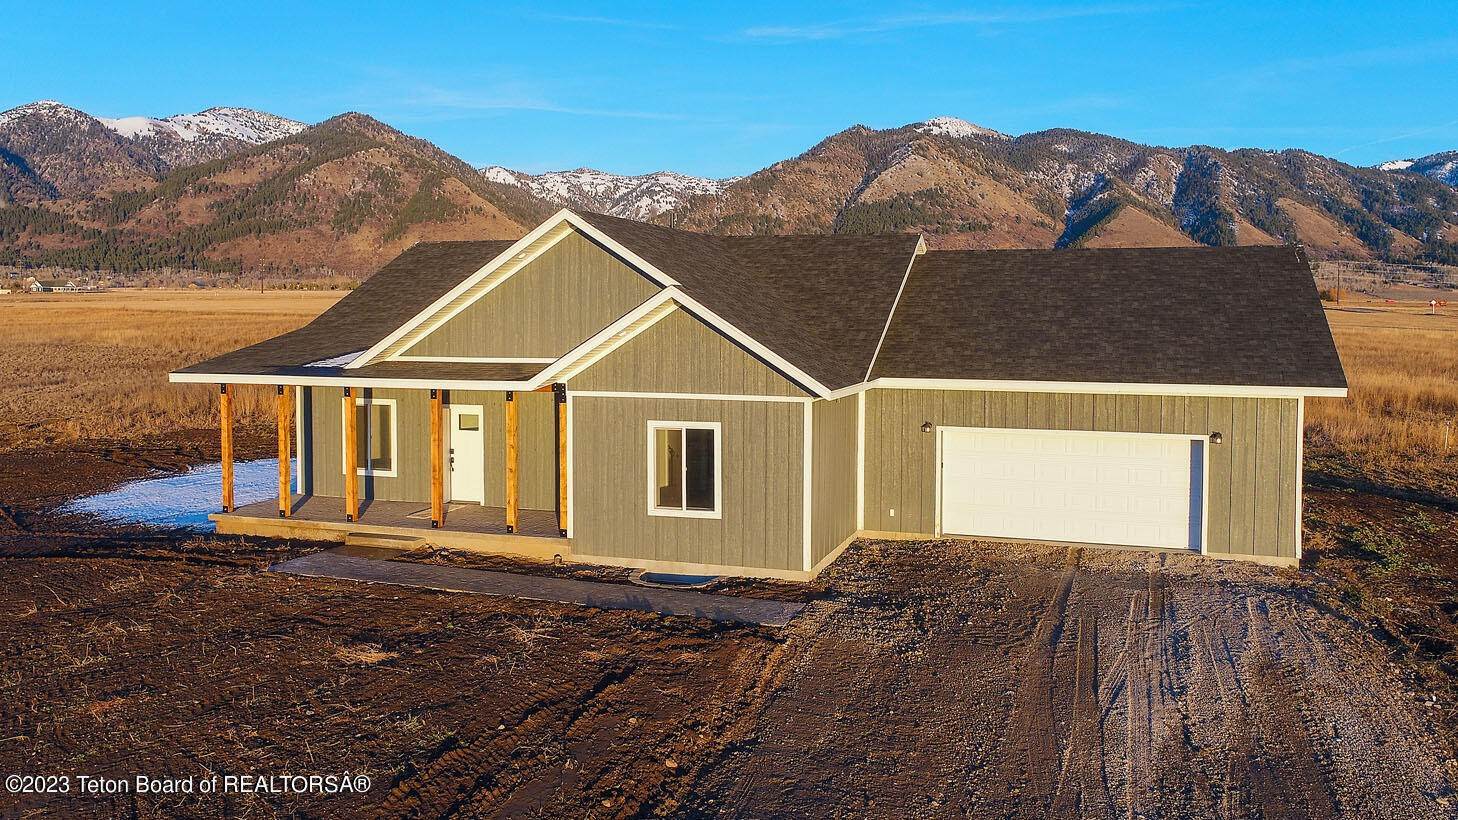 Single Family Homes for Sale at 2173 PERKINS ROAD 2173 PERKINS ROAD Thayne, Wyoming 83127 United States